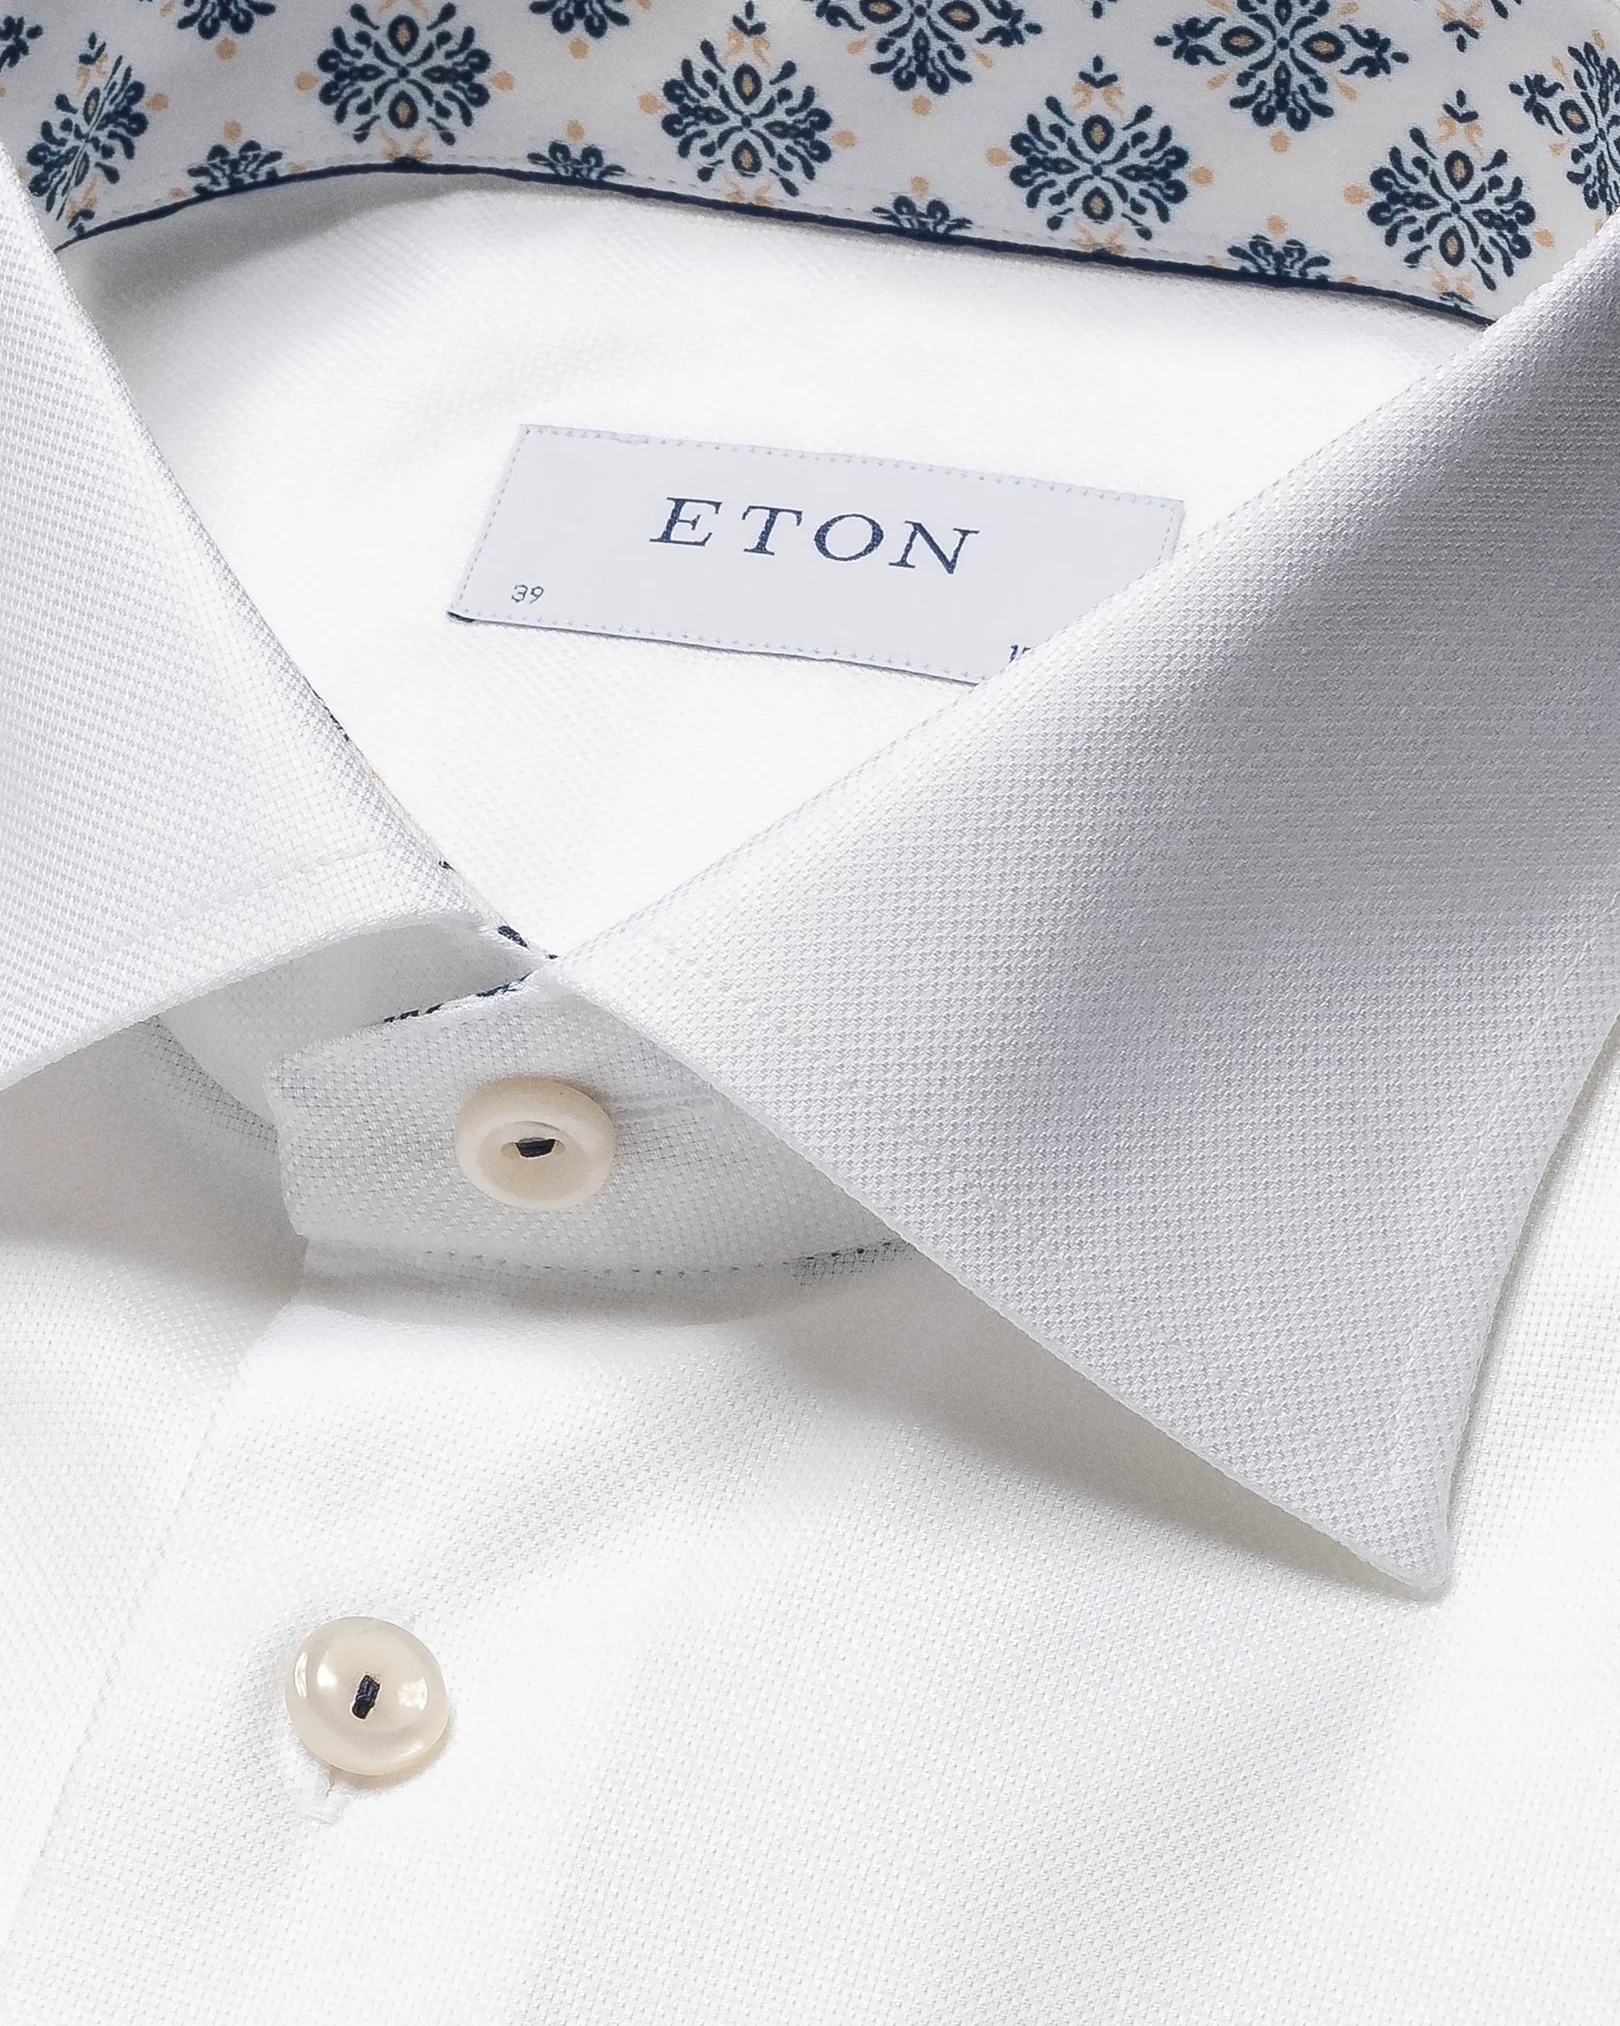 Eton - white twill shirt with special details